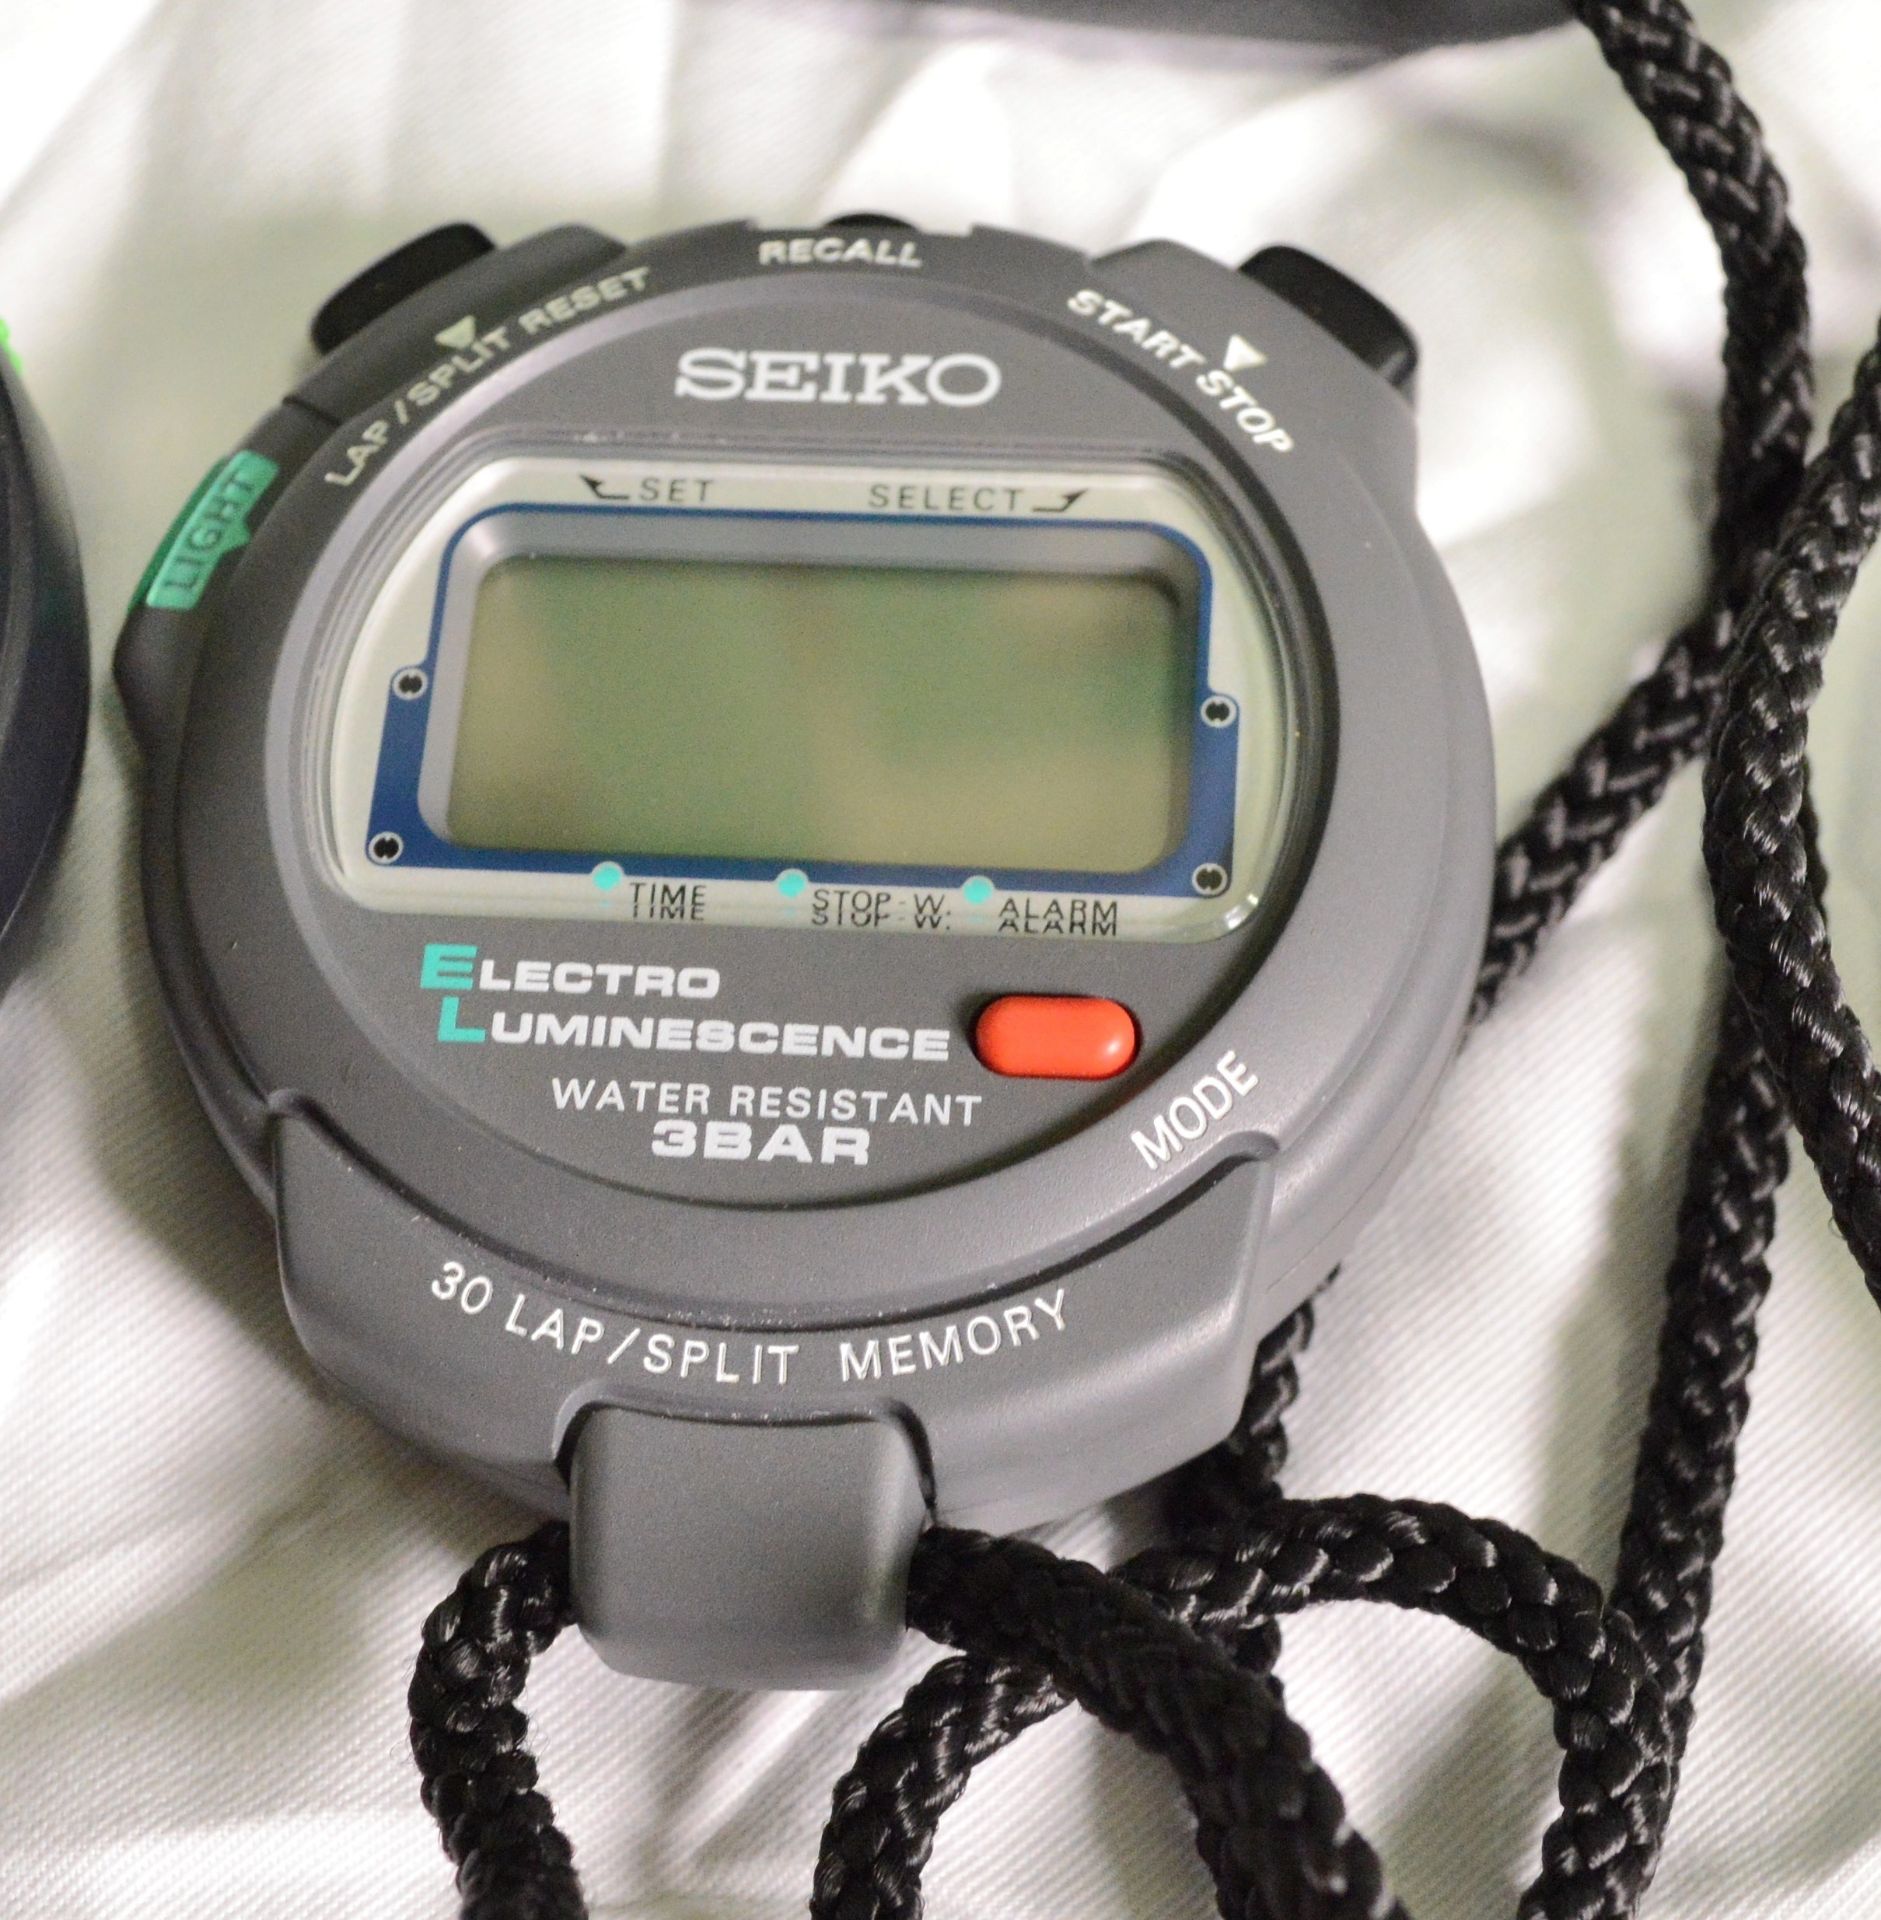 2x Seiko Digital Stopwatches with Case. - Image 4 of 5